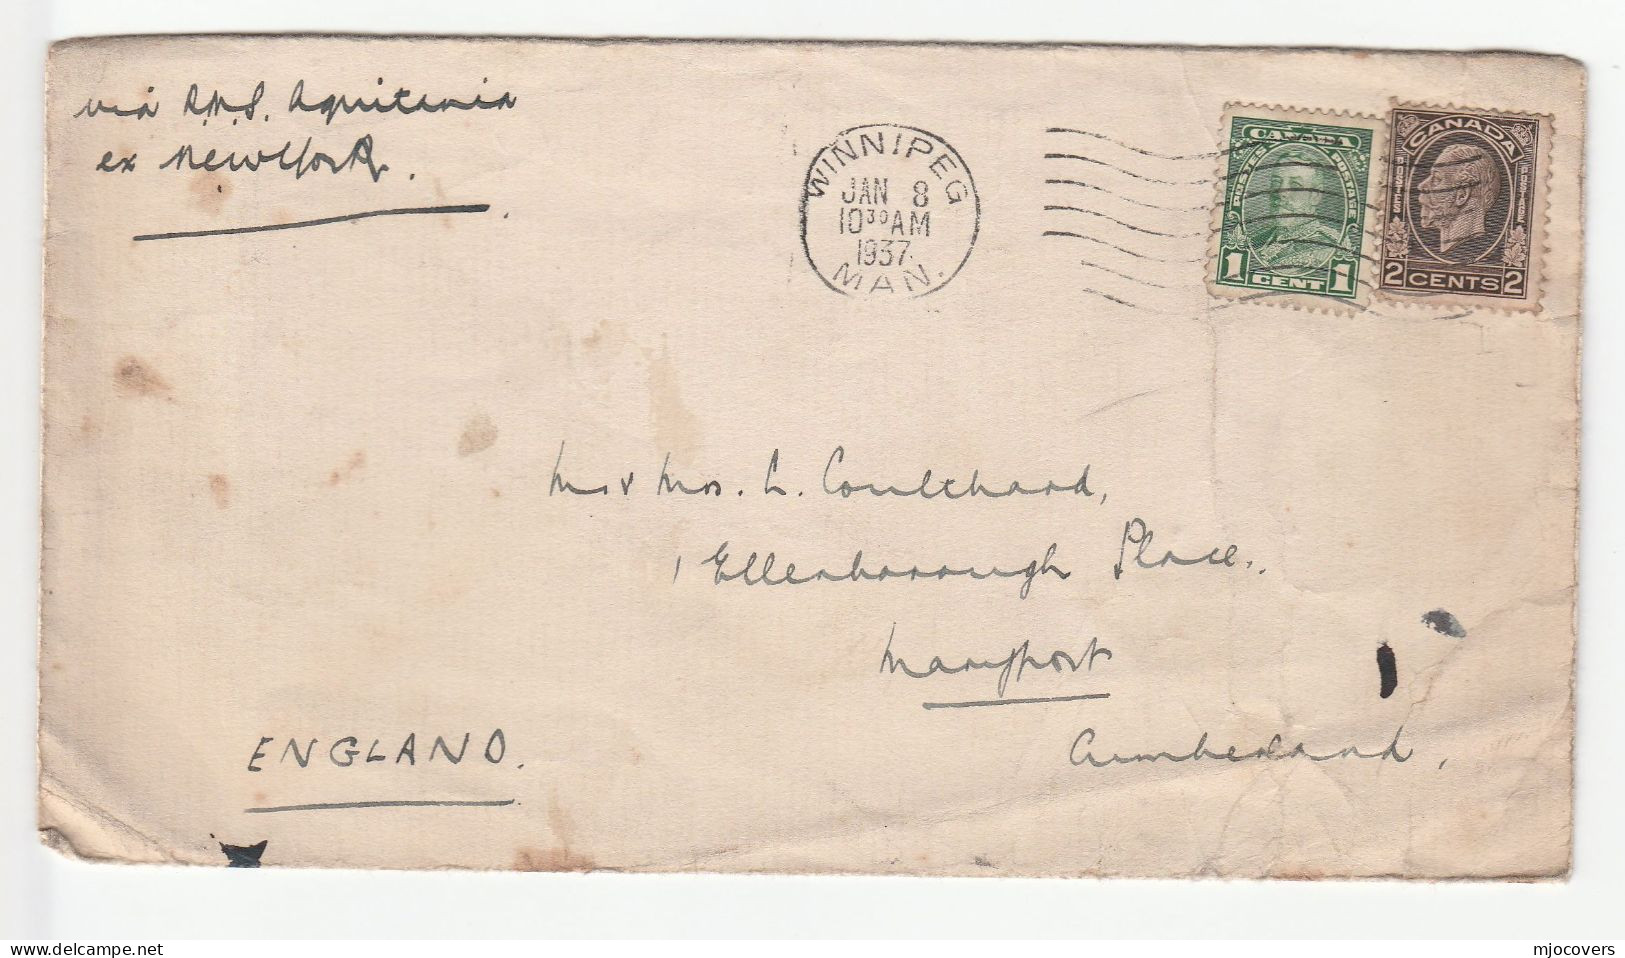 1937 - 1939 Ships RMS  AQUITANIA, SS BREMEN, SS PRESIDENT HARDING Covers CANADA To GB Stamps Ship Cover - Covers & Documents